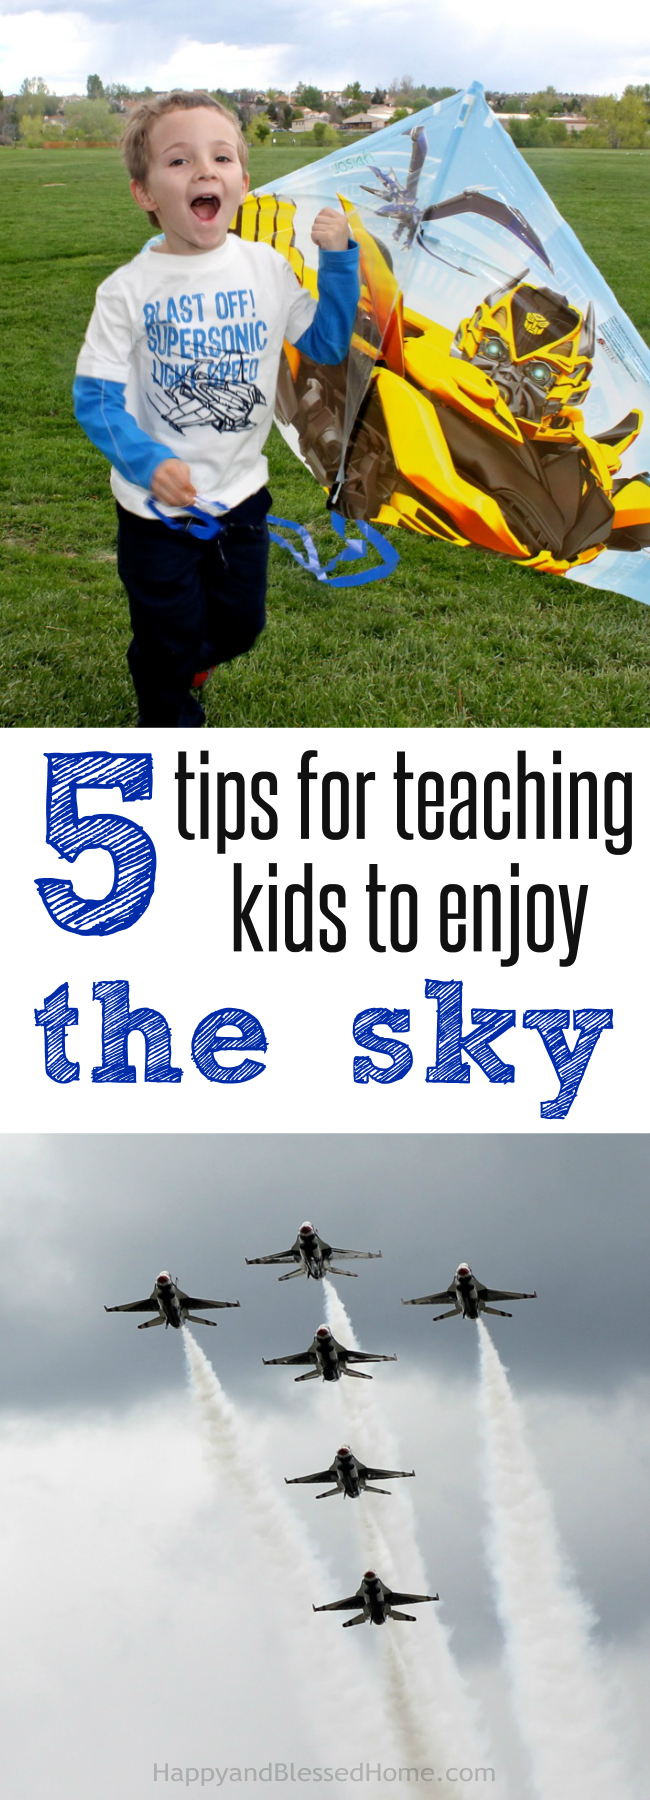 5 Tips for teaching Kids to Enjoy the Sky - Parenting Tips by HappyandBlessedHome